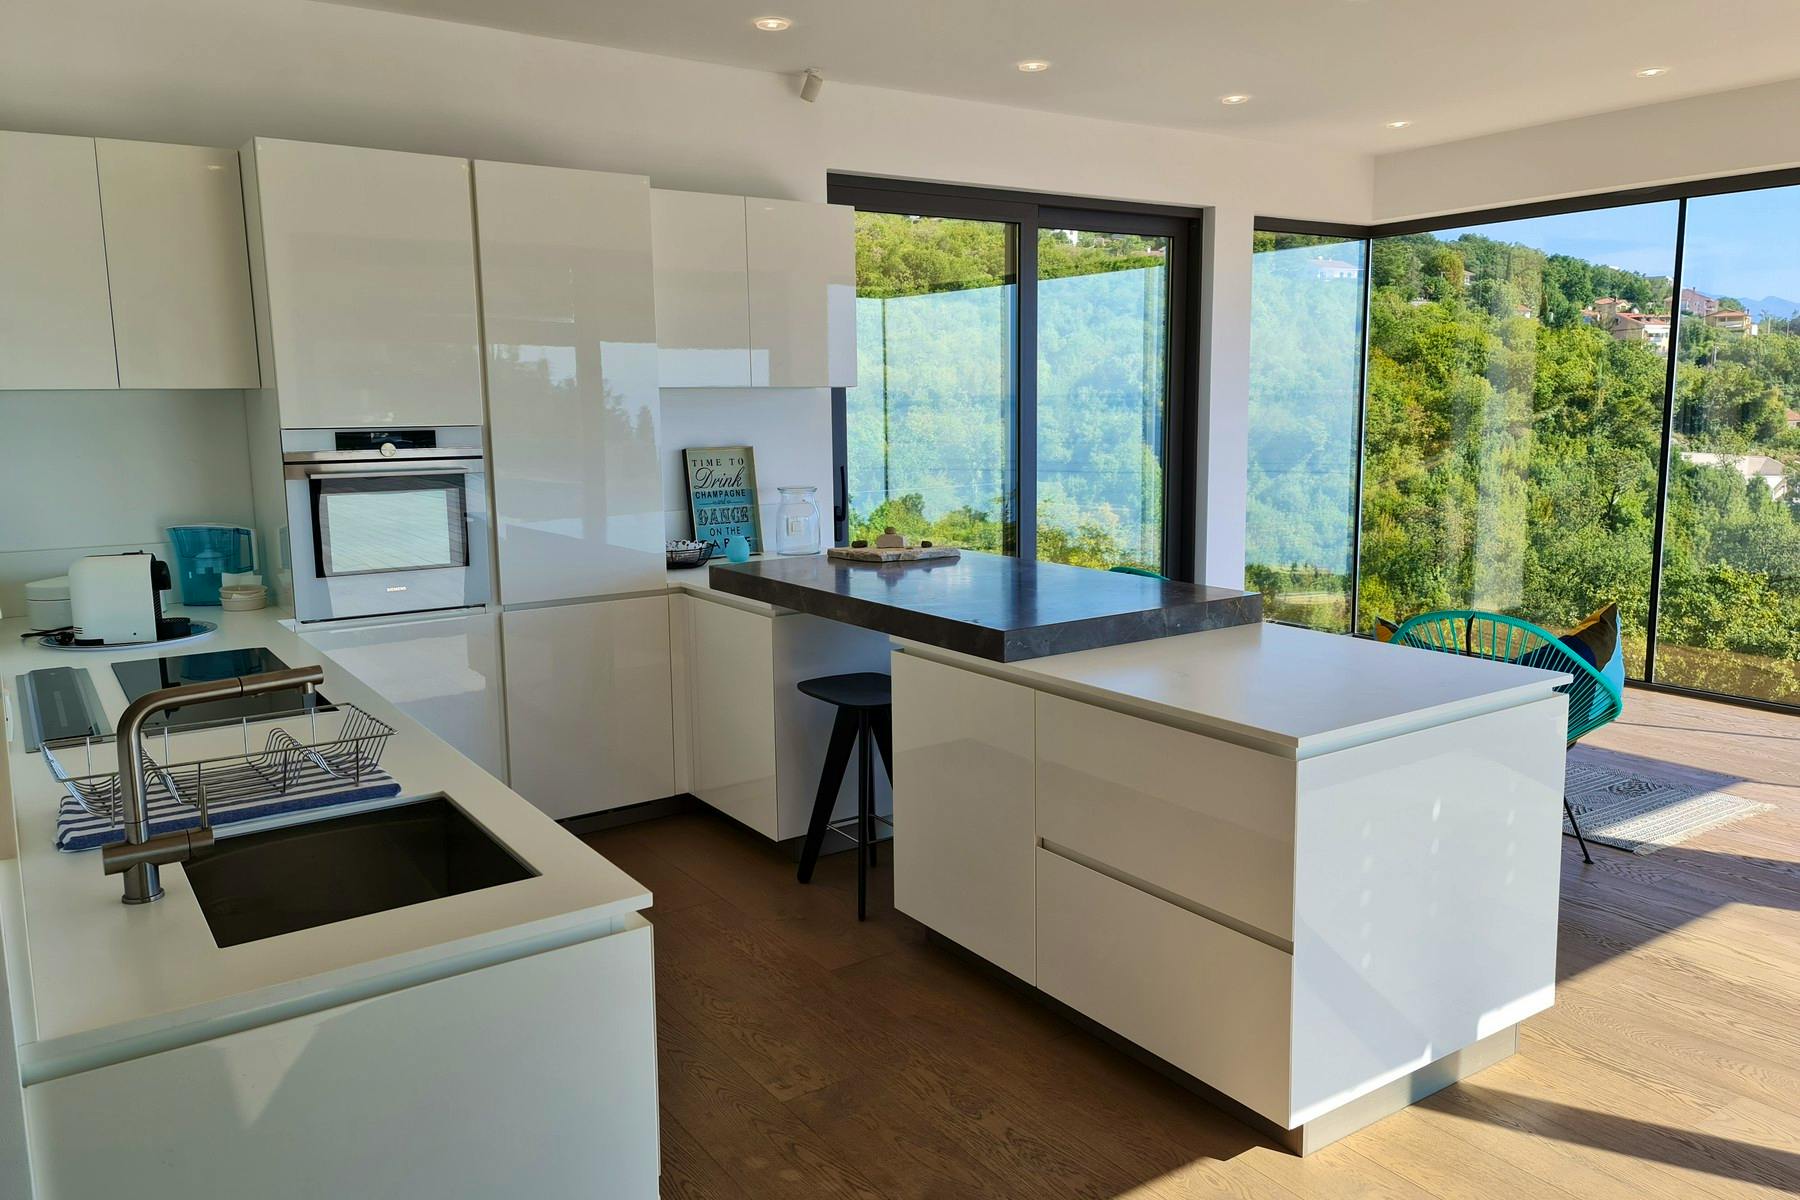 Modern fully fitted kitchen